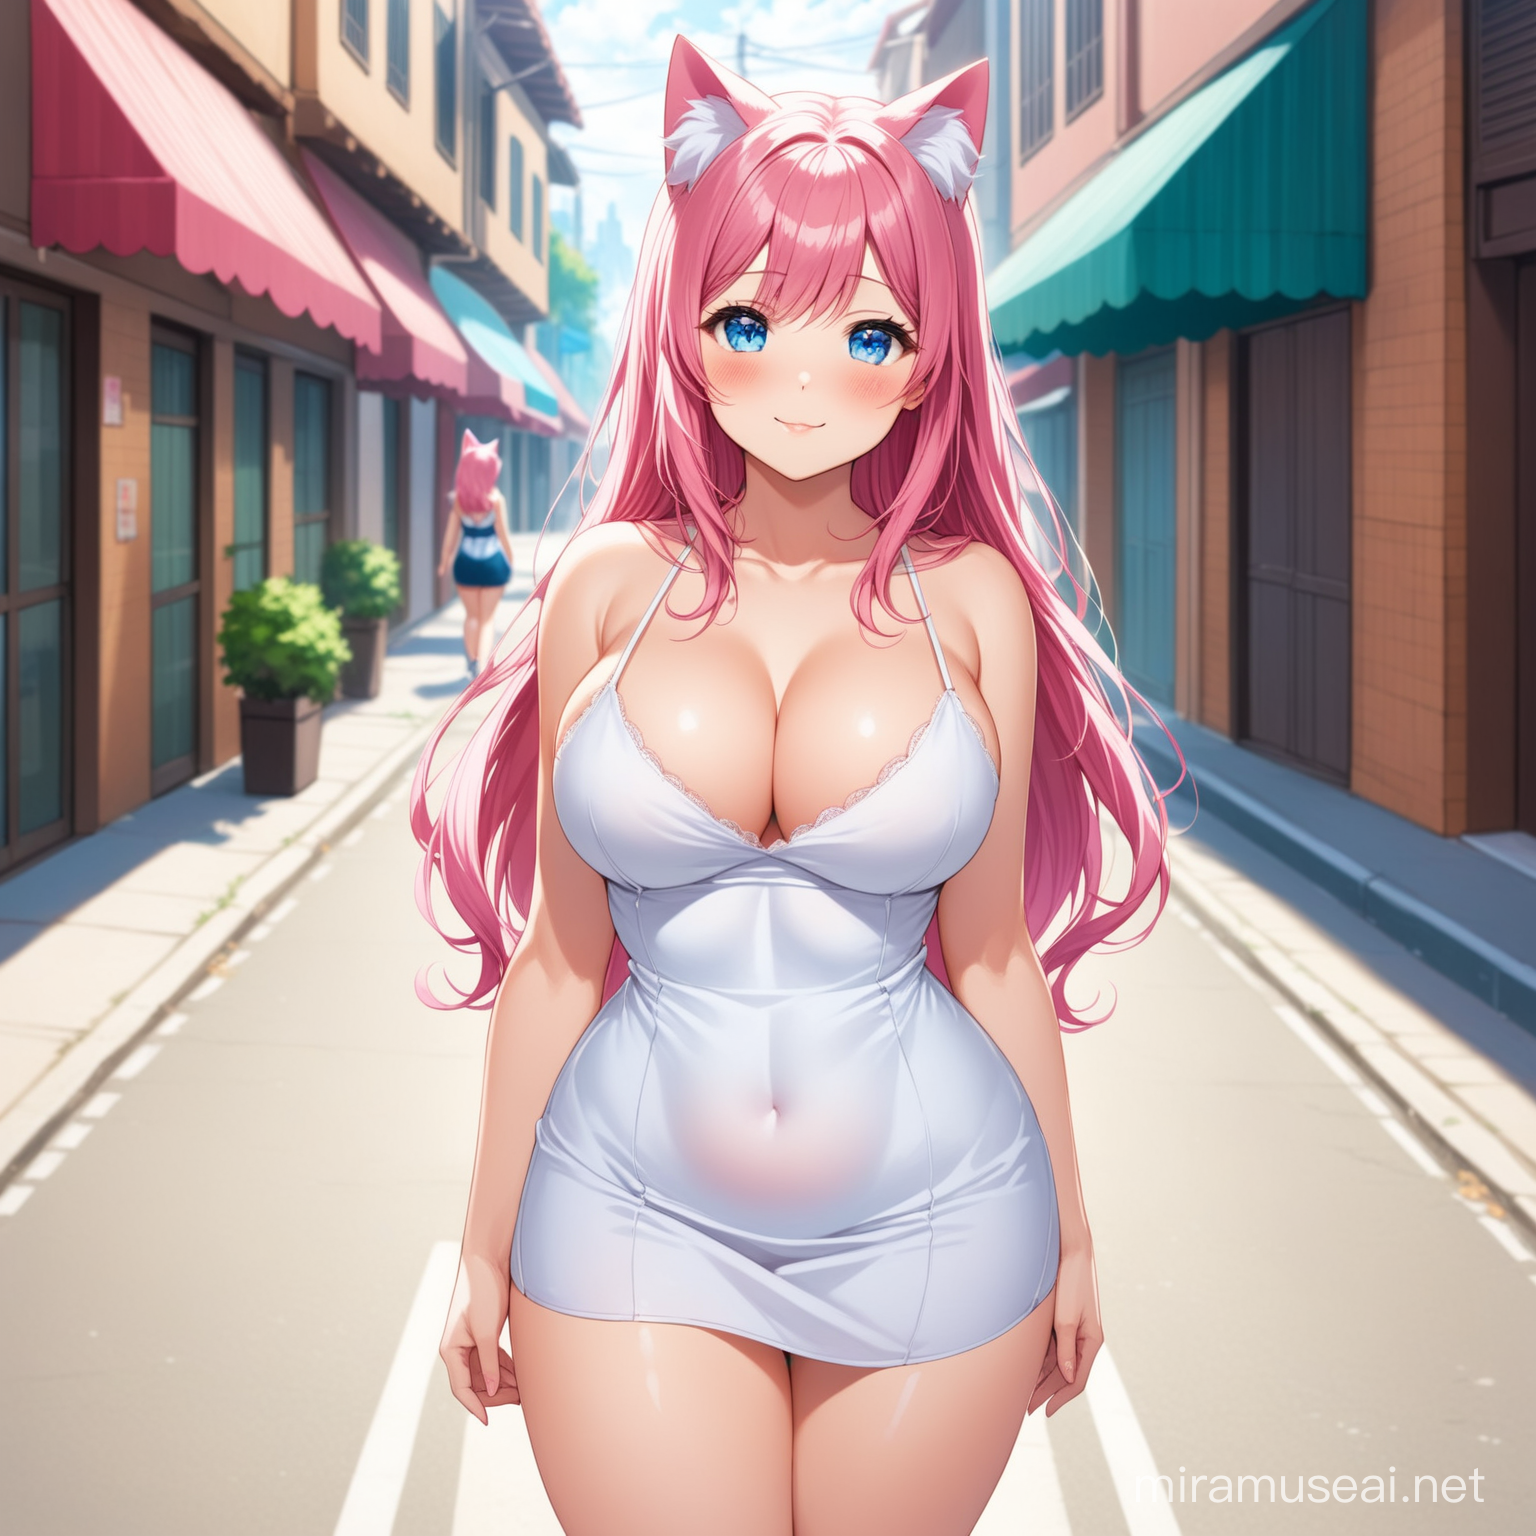 Adorable Girl with Cat Ears and Pink Hair Standing in Street on Day